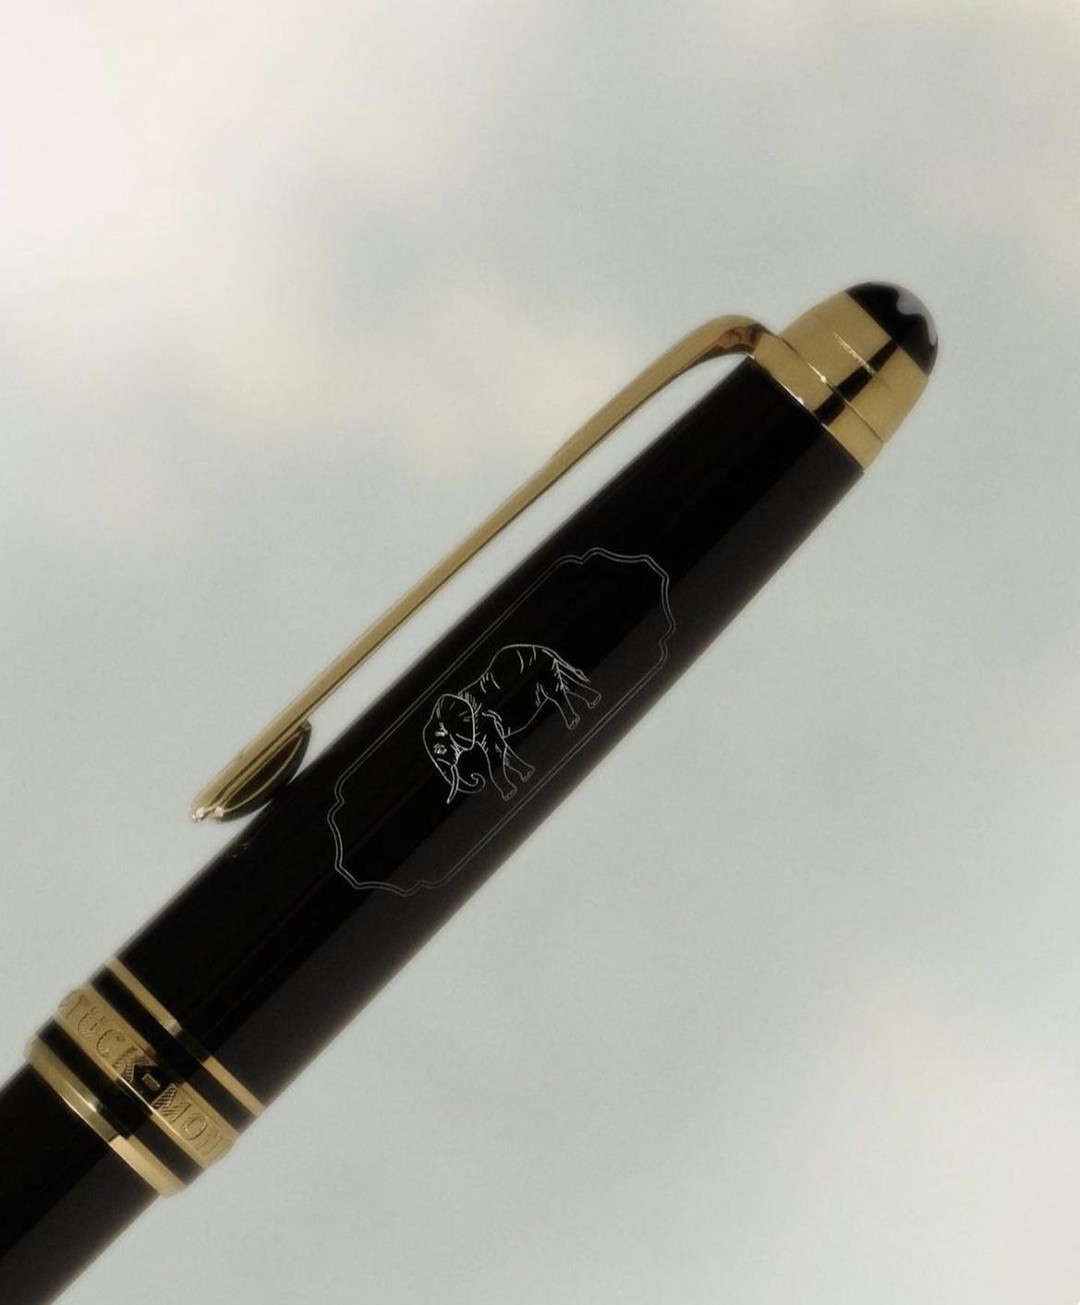 montblanc pen for father's day or graduation